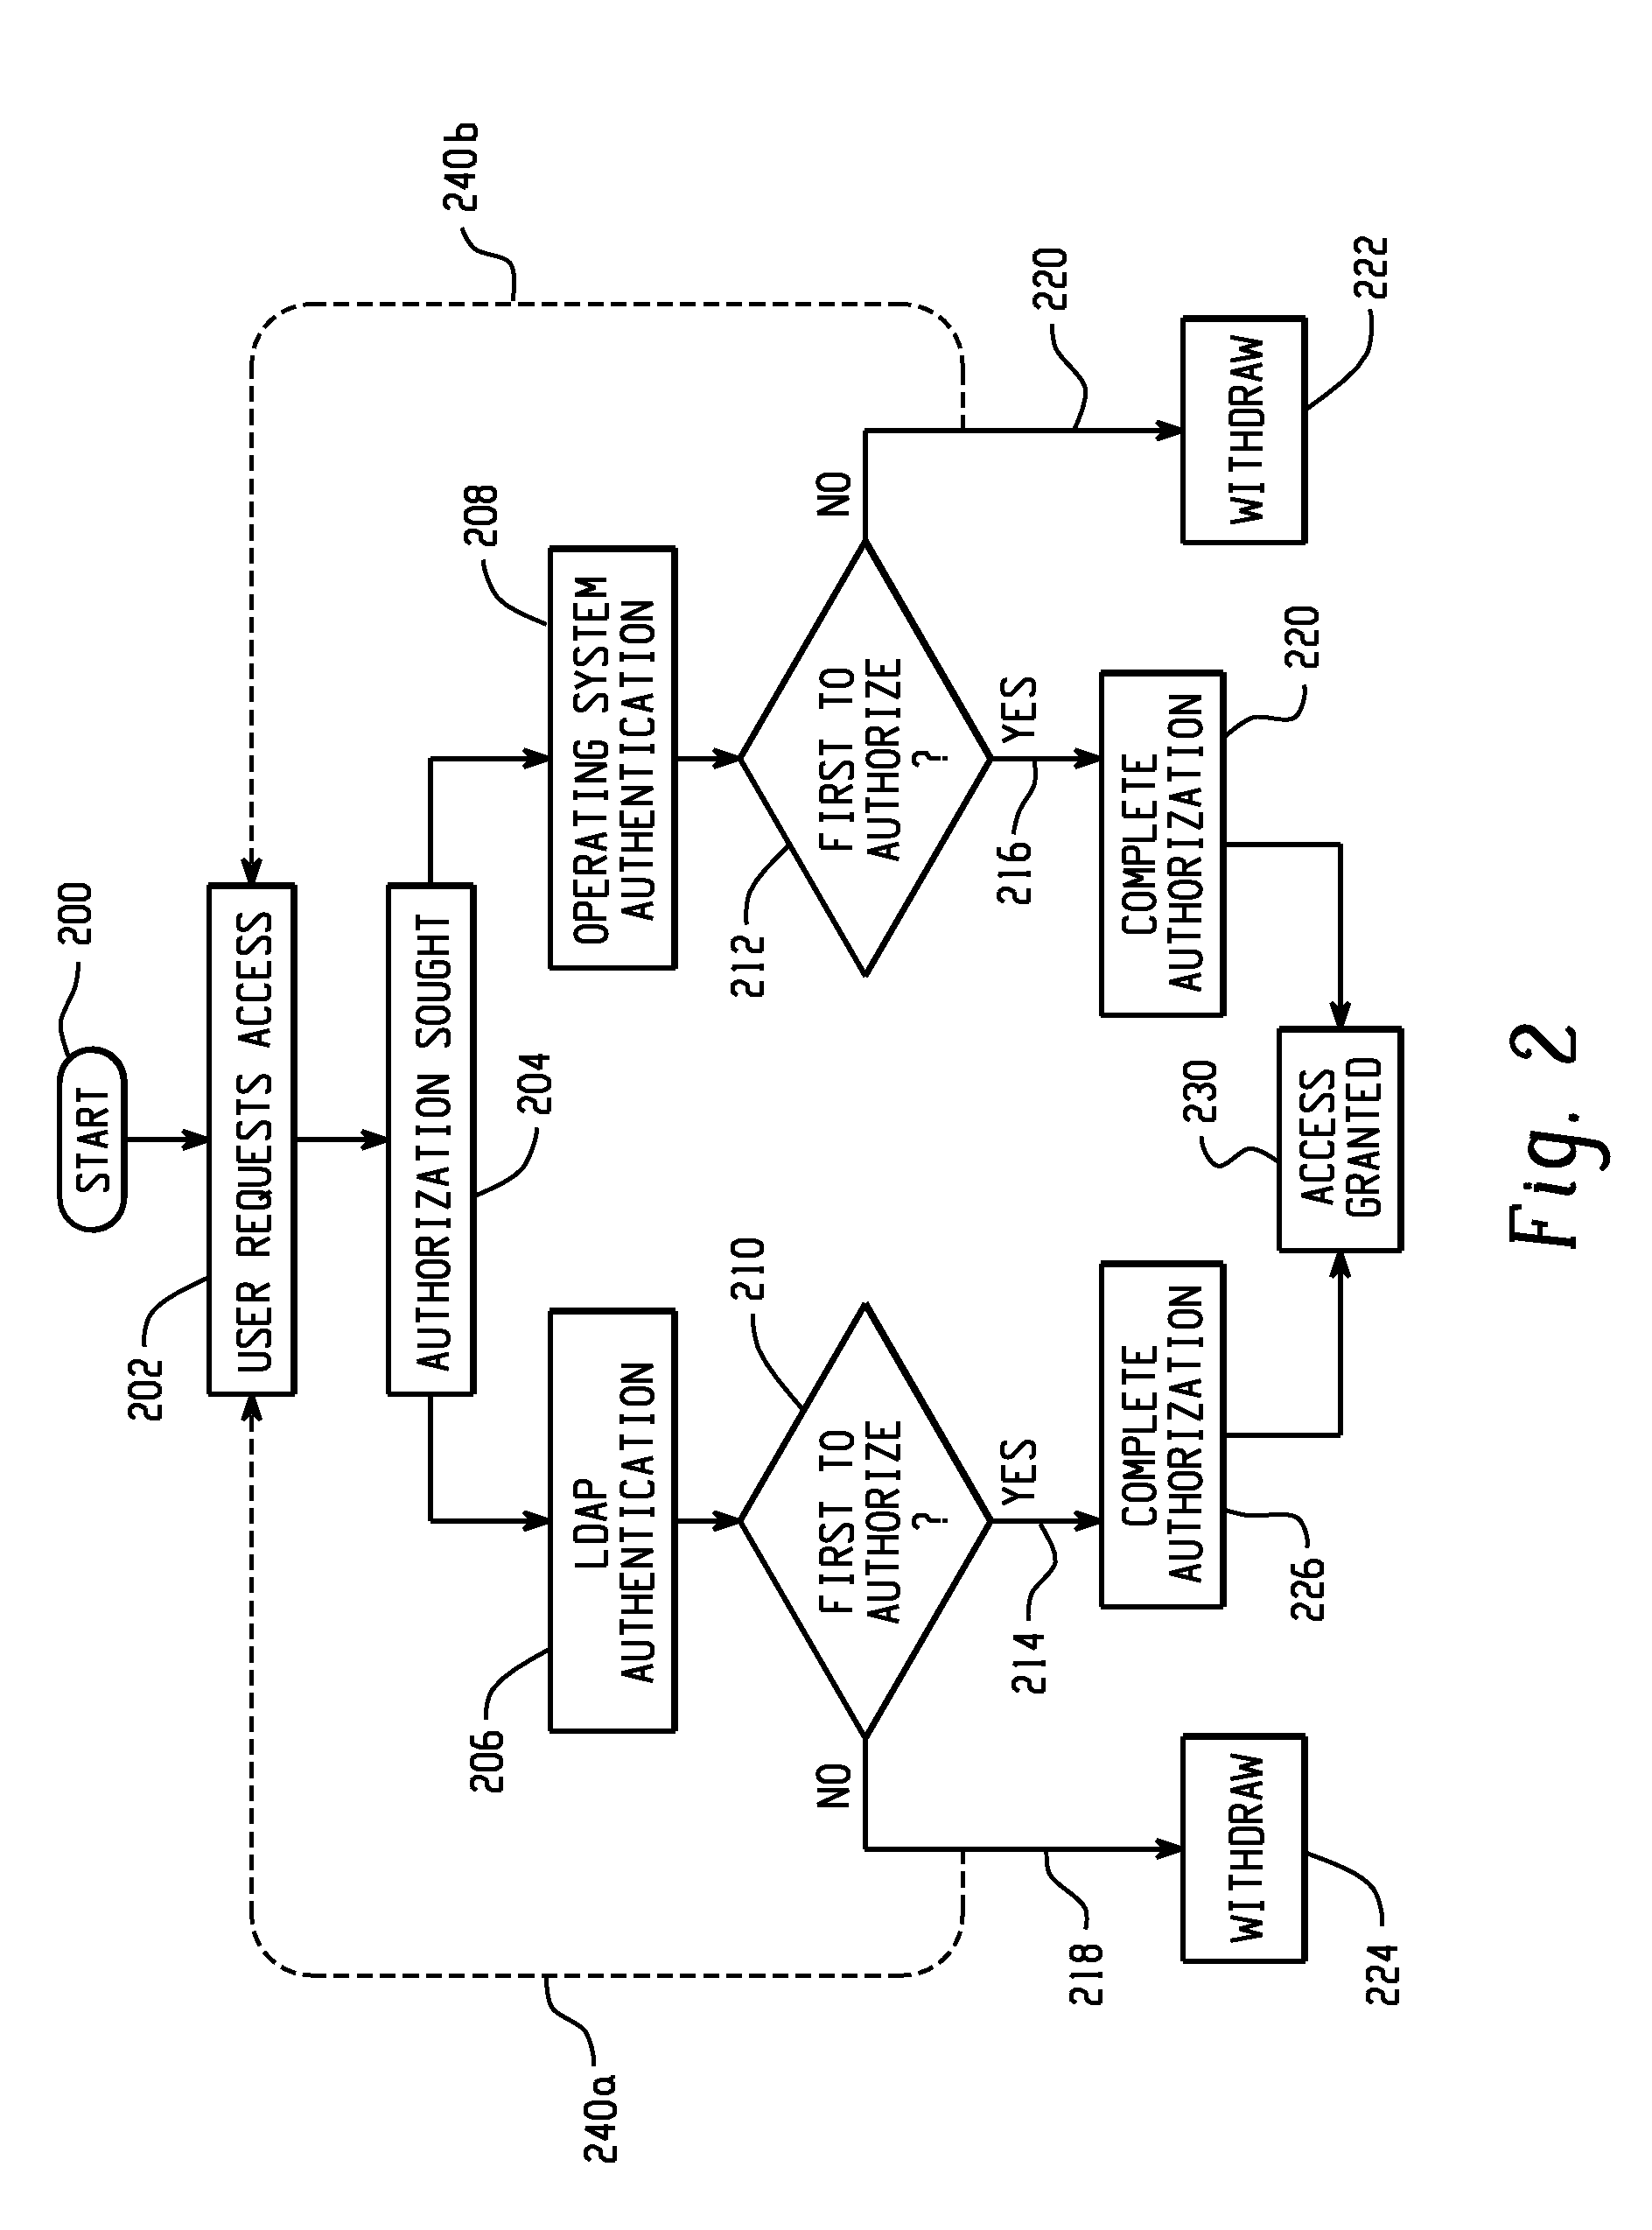 Authentication of user database access